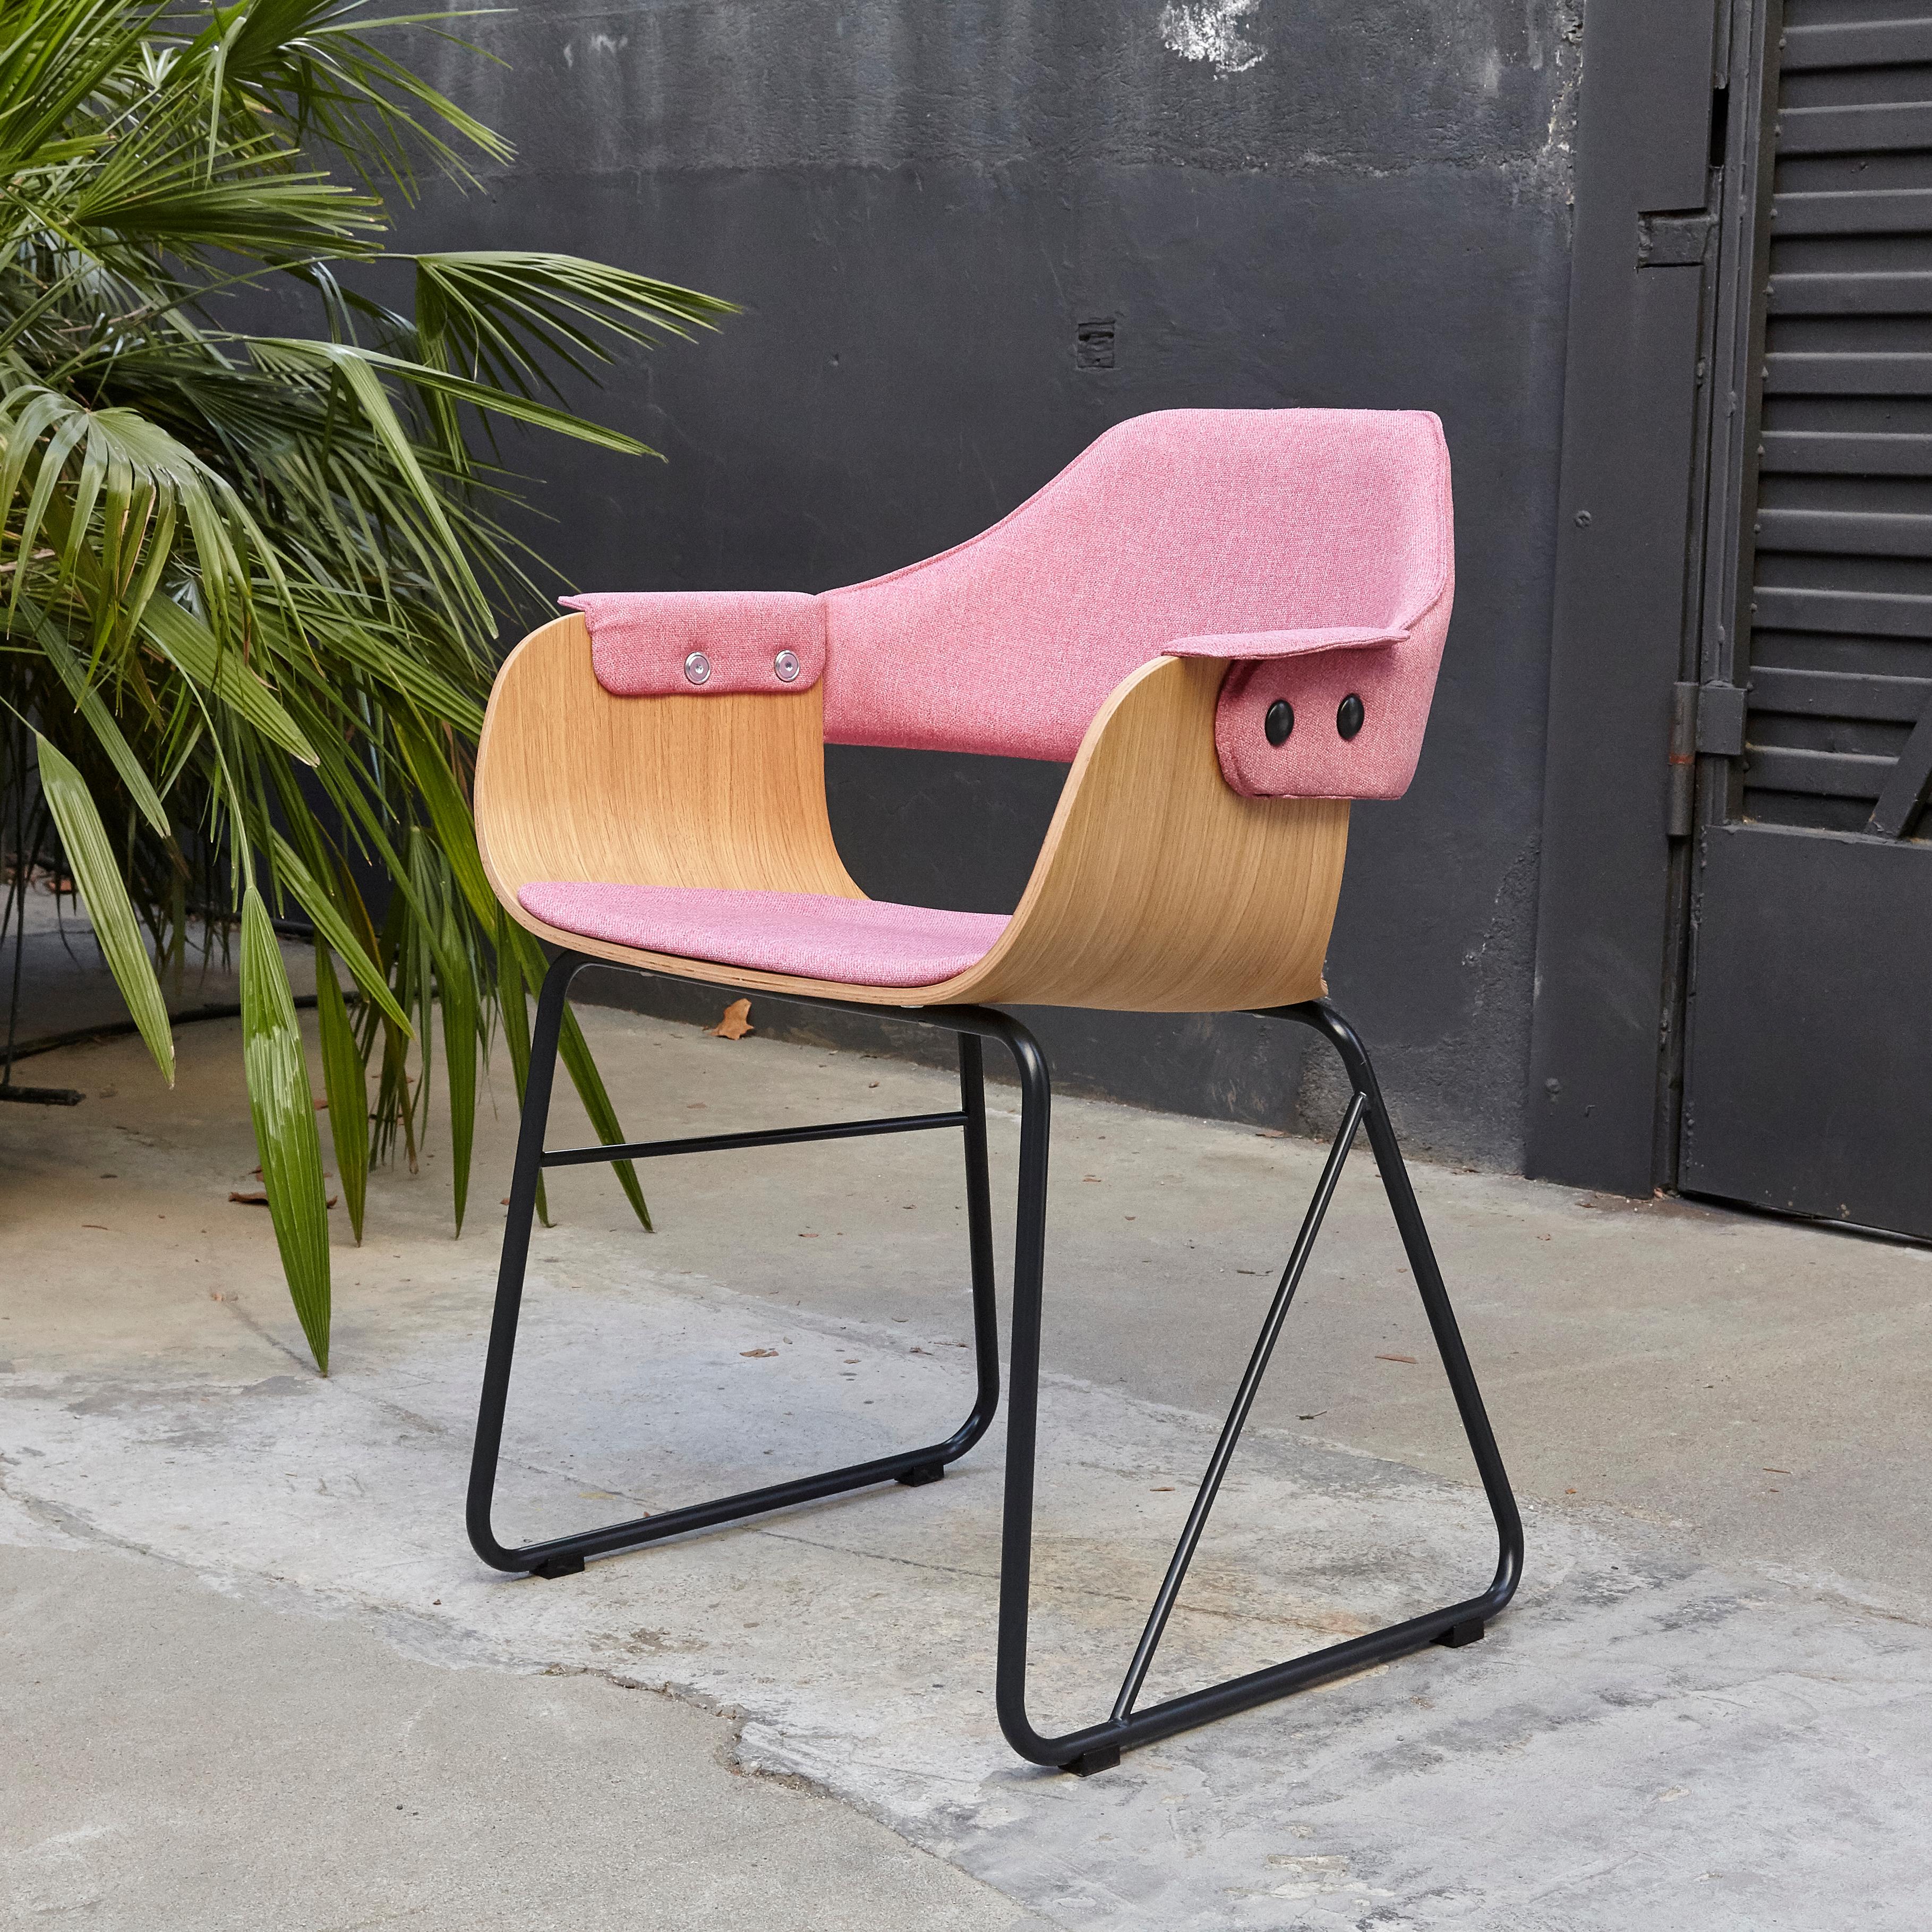 Jaime Hayon Contemporary Pink Upholstered Wood Chair Showtime by BD Barcelona 1